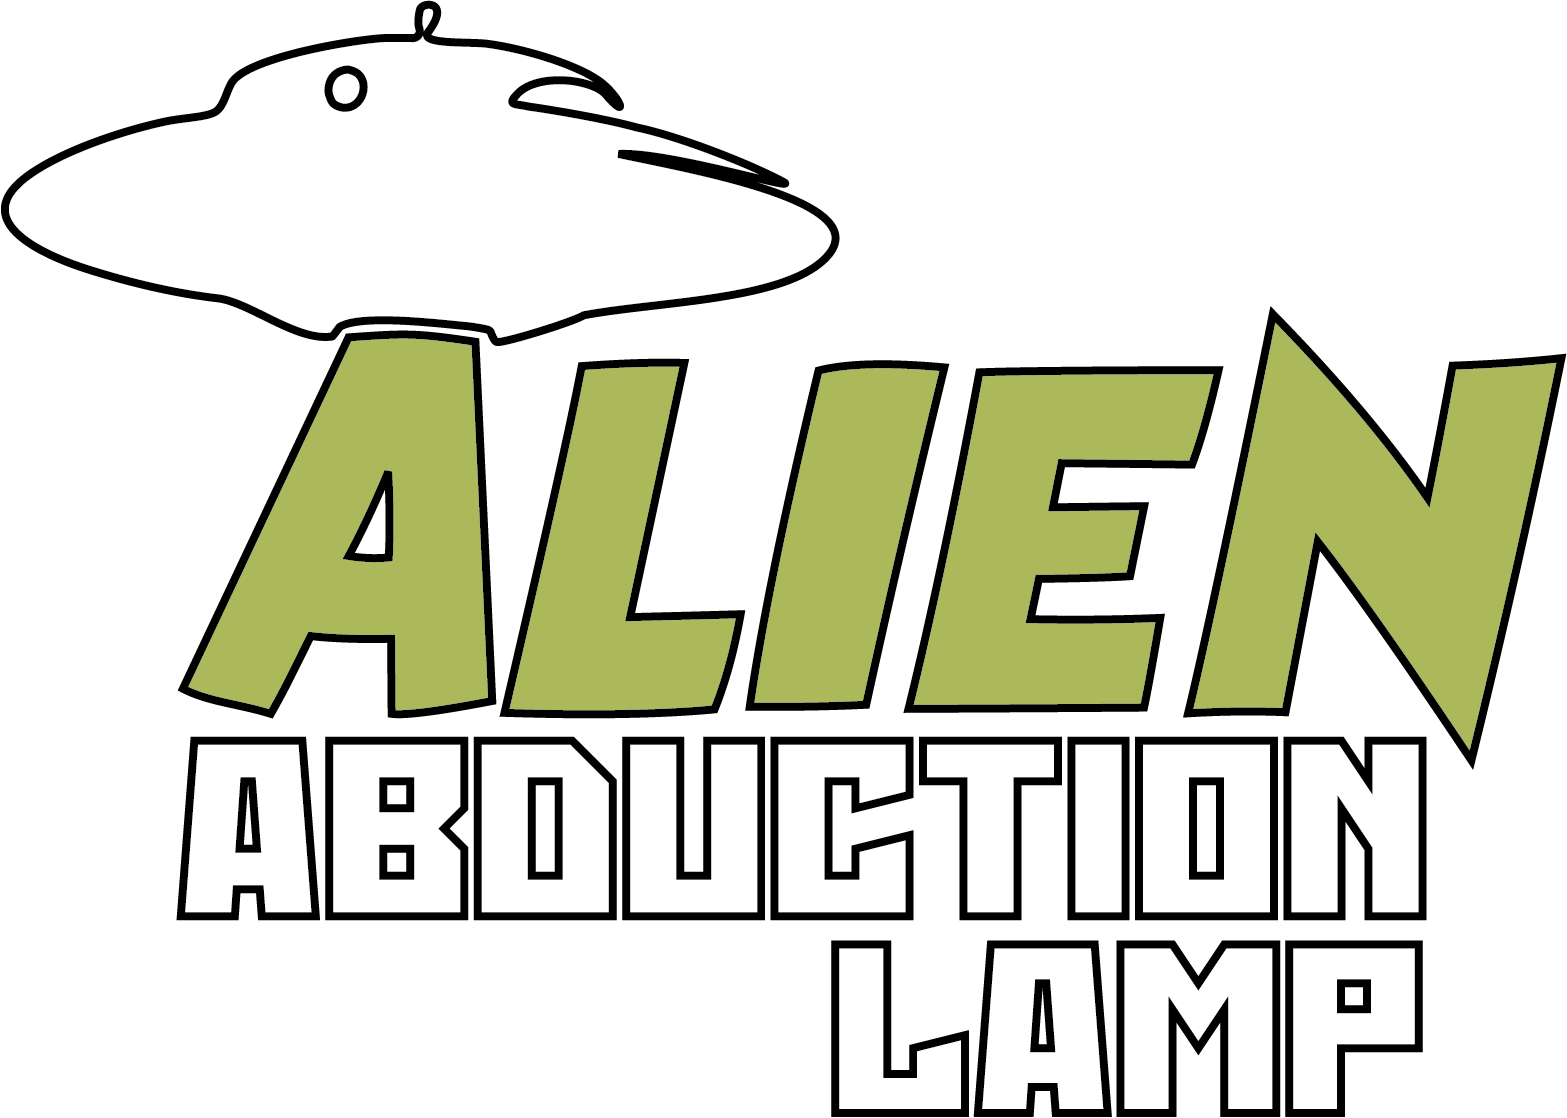 An out of this world, alien abduction themed lamp for extra terrestrial fanatics and UFO conspiracists. This lamp is an ideal gift for gamers looking to add to their peripherals, aesthetic, and ambience. 